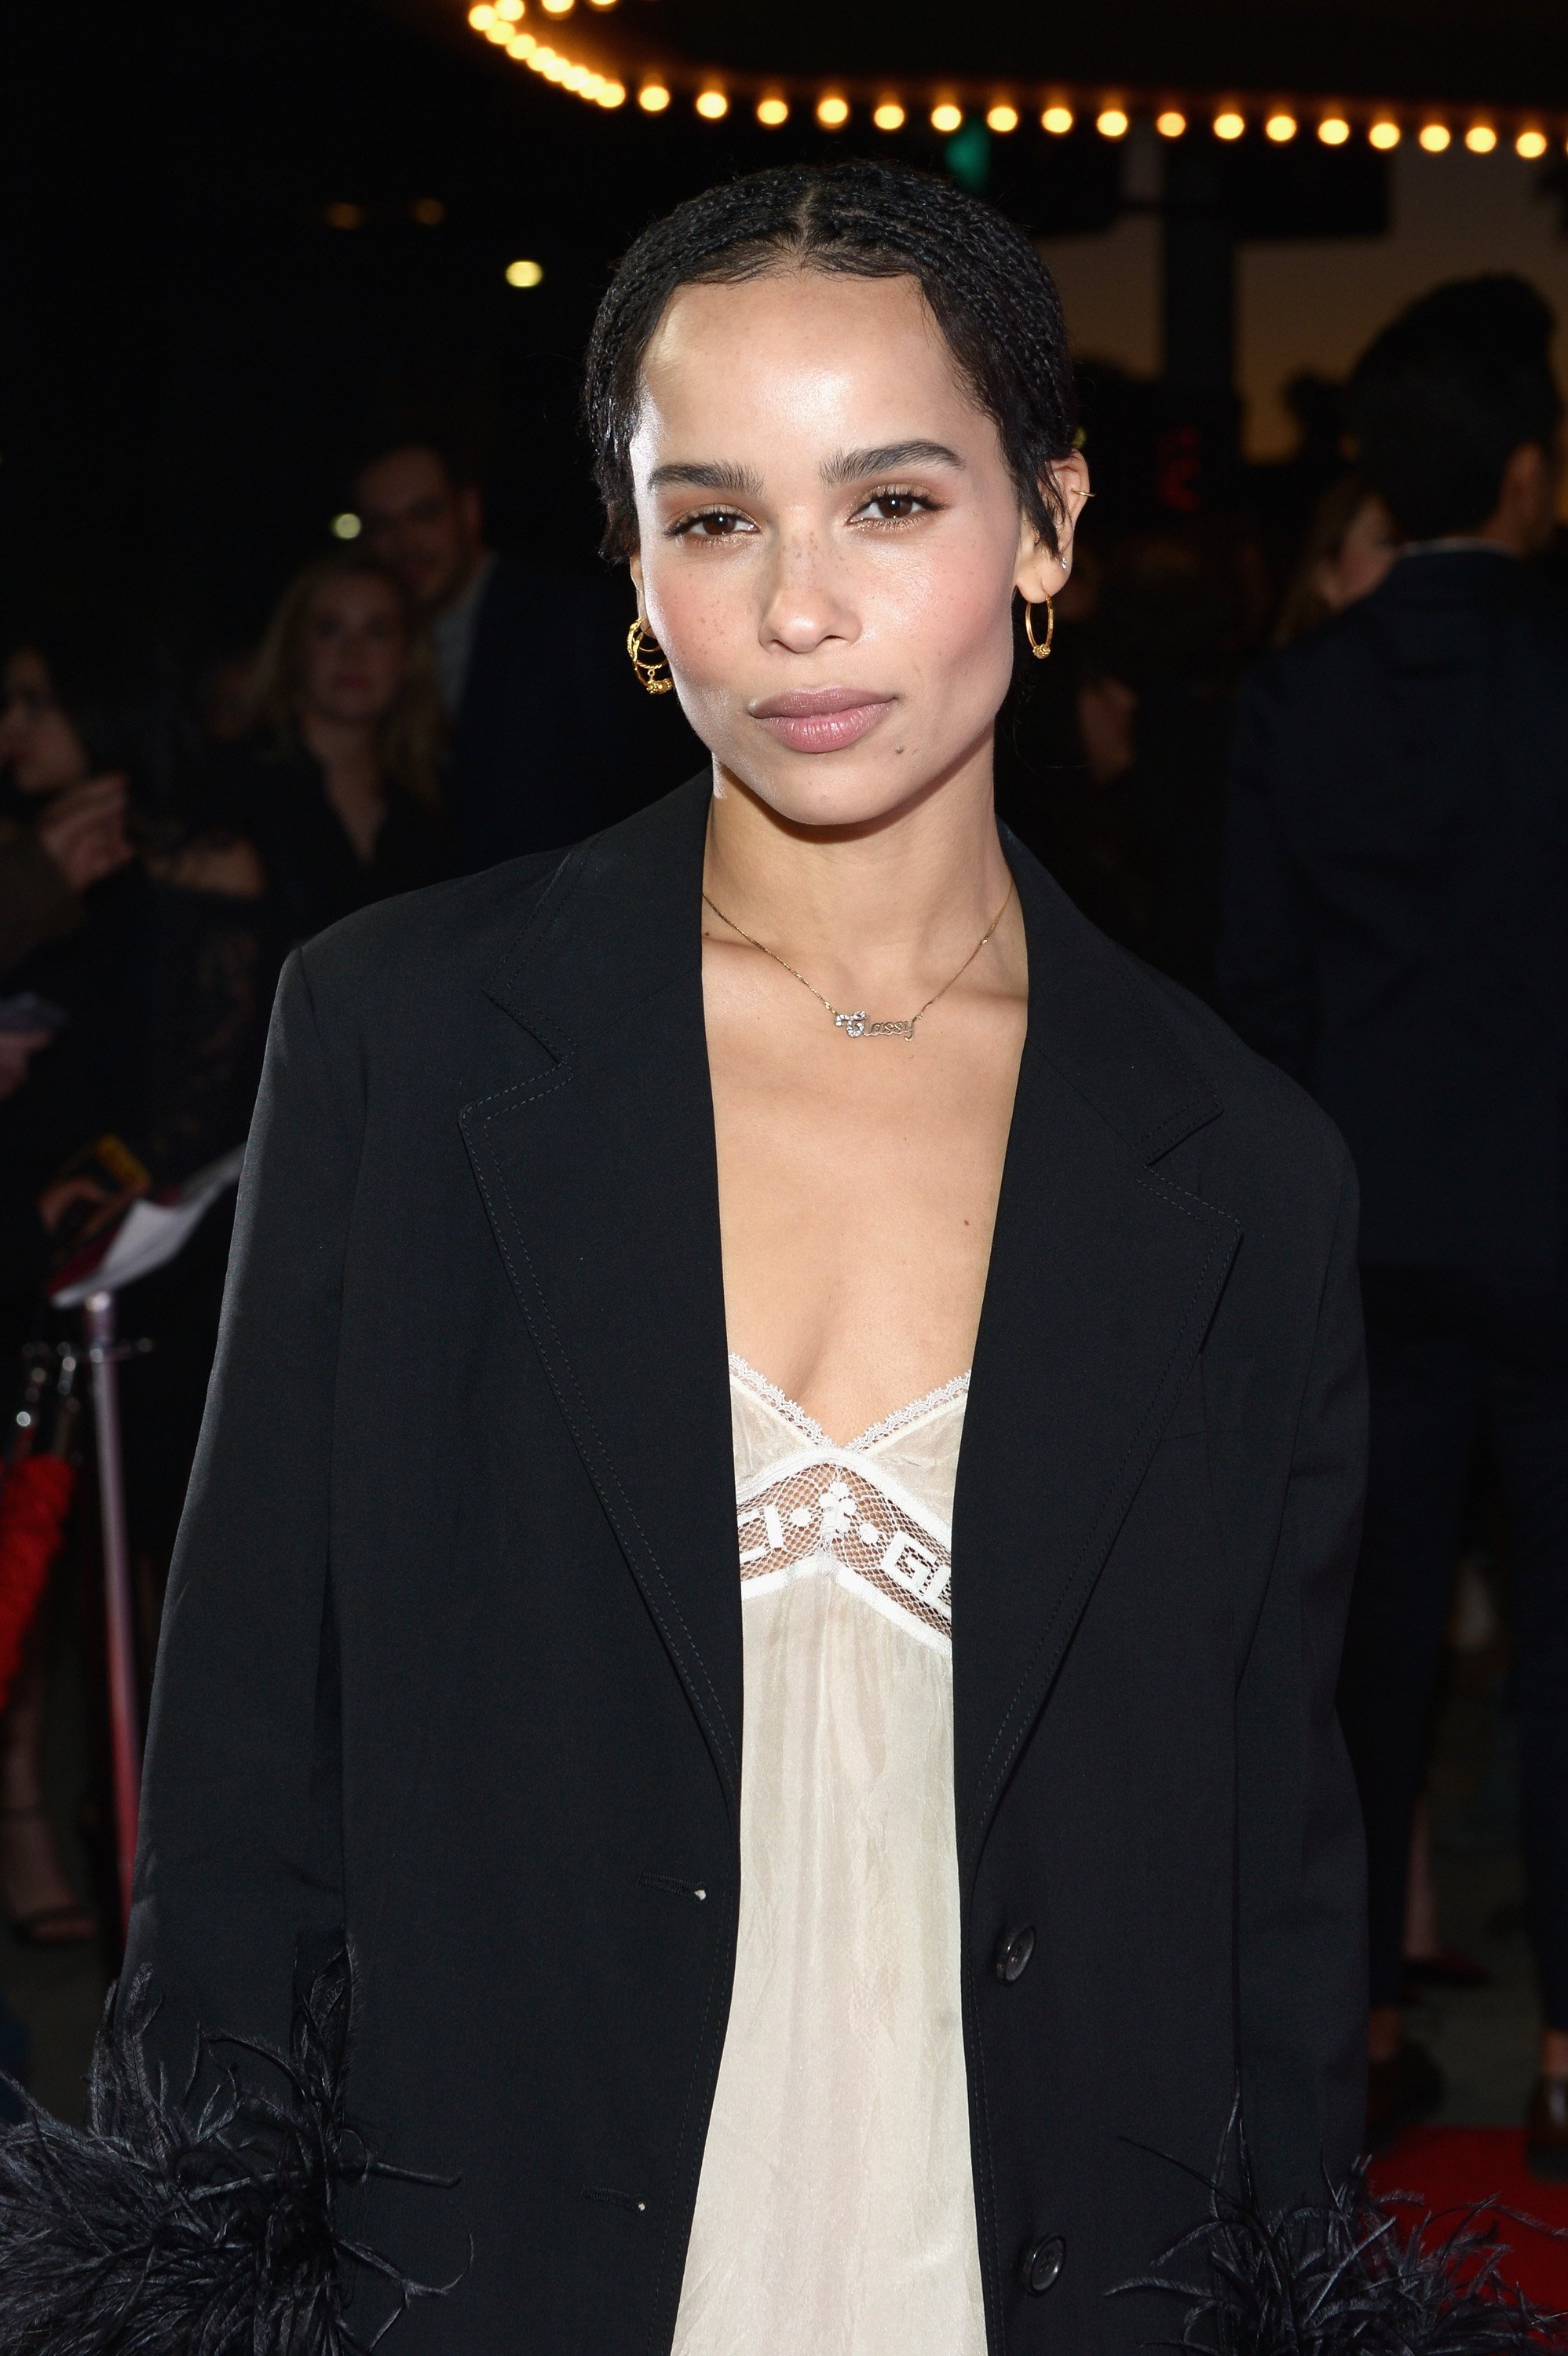 Zoe Kravitz attends the Los Angeles premiere of Neon's "Gemini." | Source: Getty Images